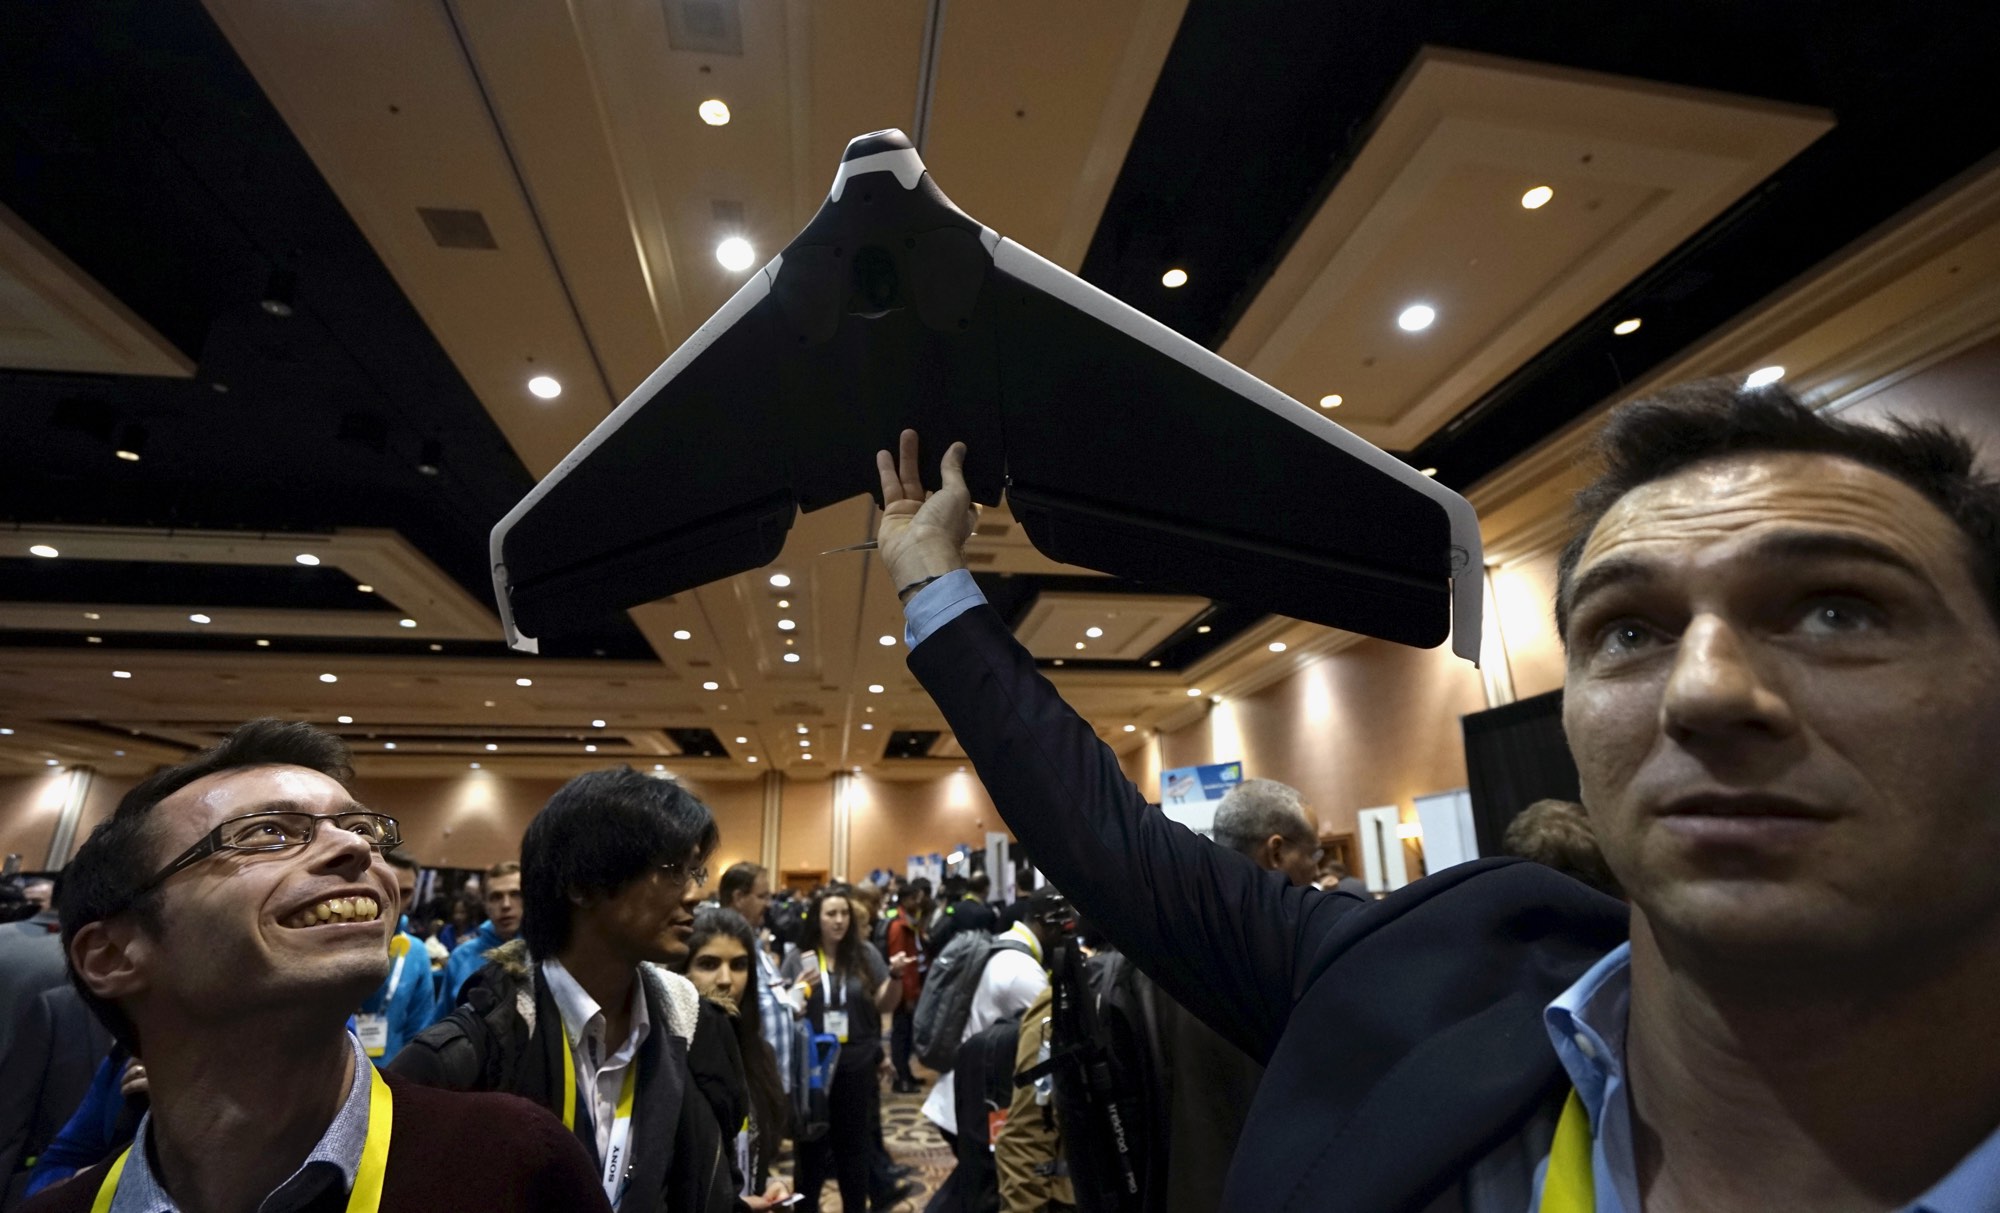 Representatives from the French company Parrot demonstrate a prototype of their new Disco drone at the opening event at CES 2016. The Disco is the first wing-shaped drone which a user can pilot with no learning process, according to the company. REUTERS